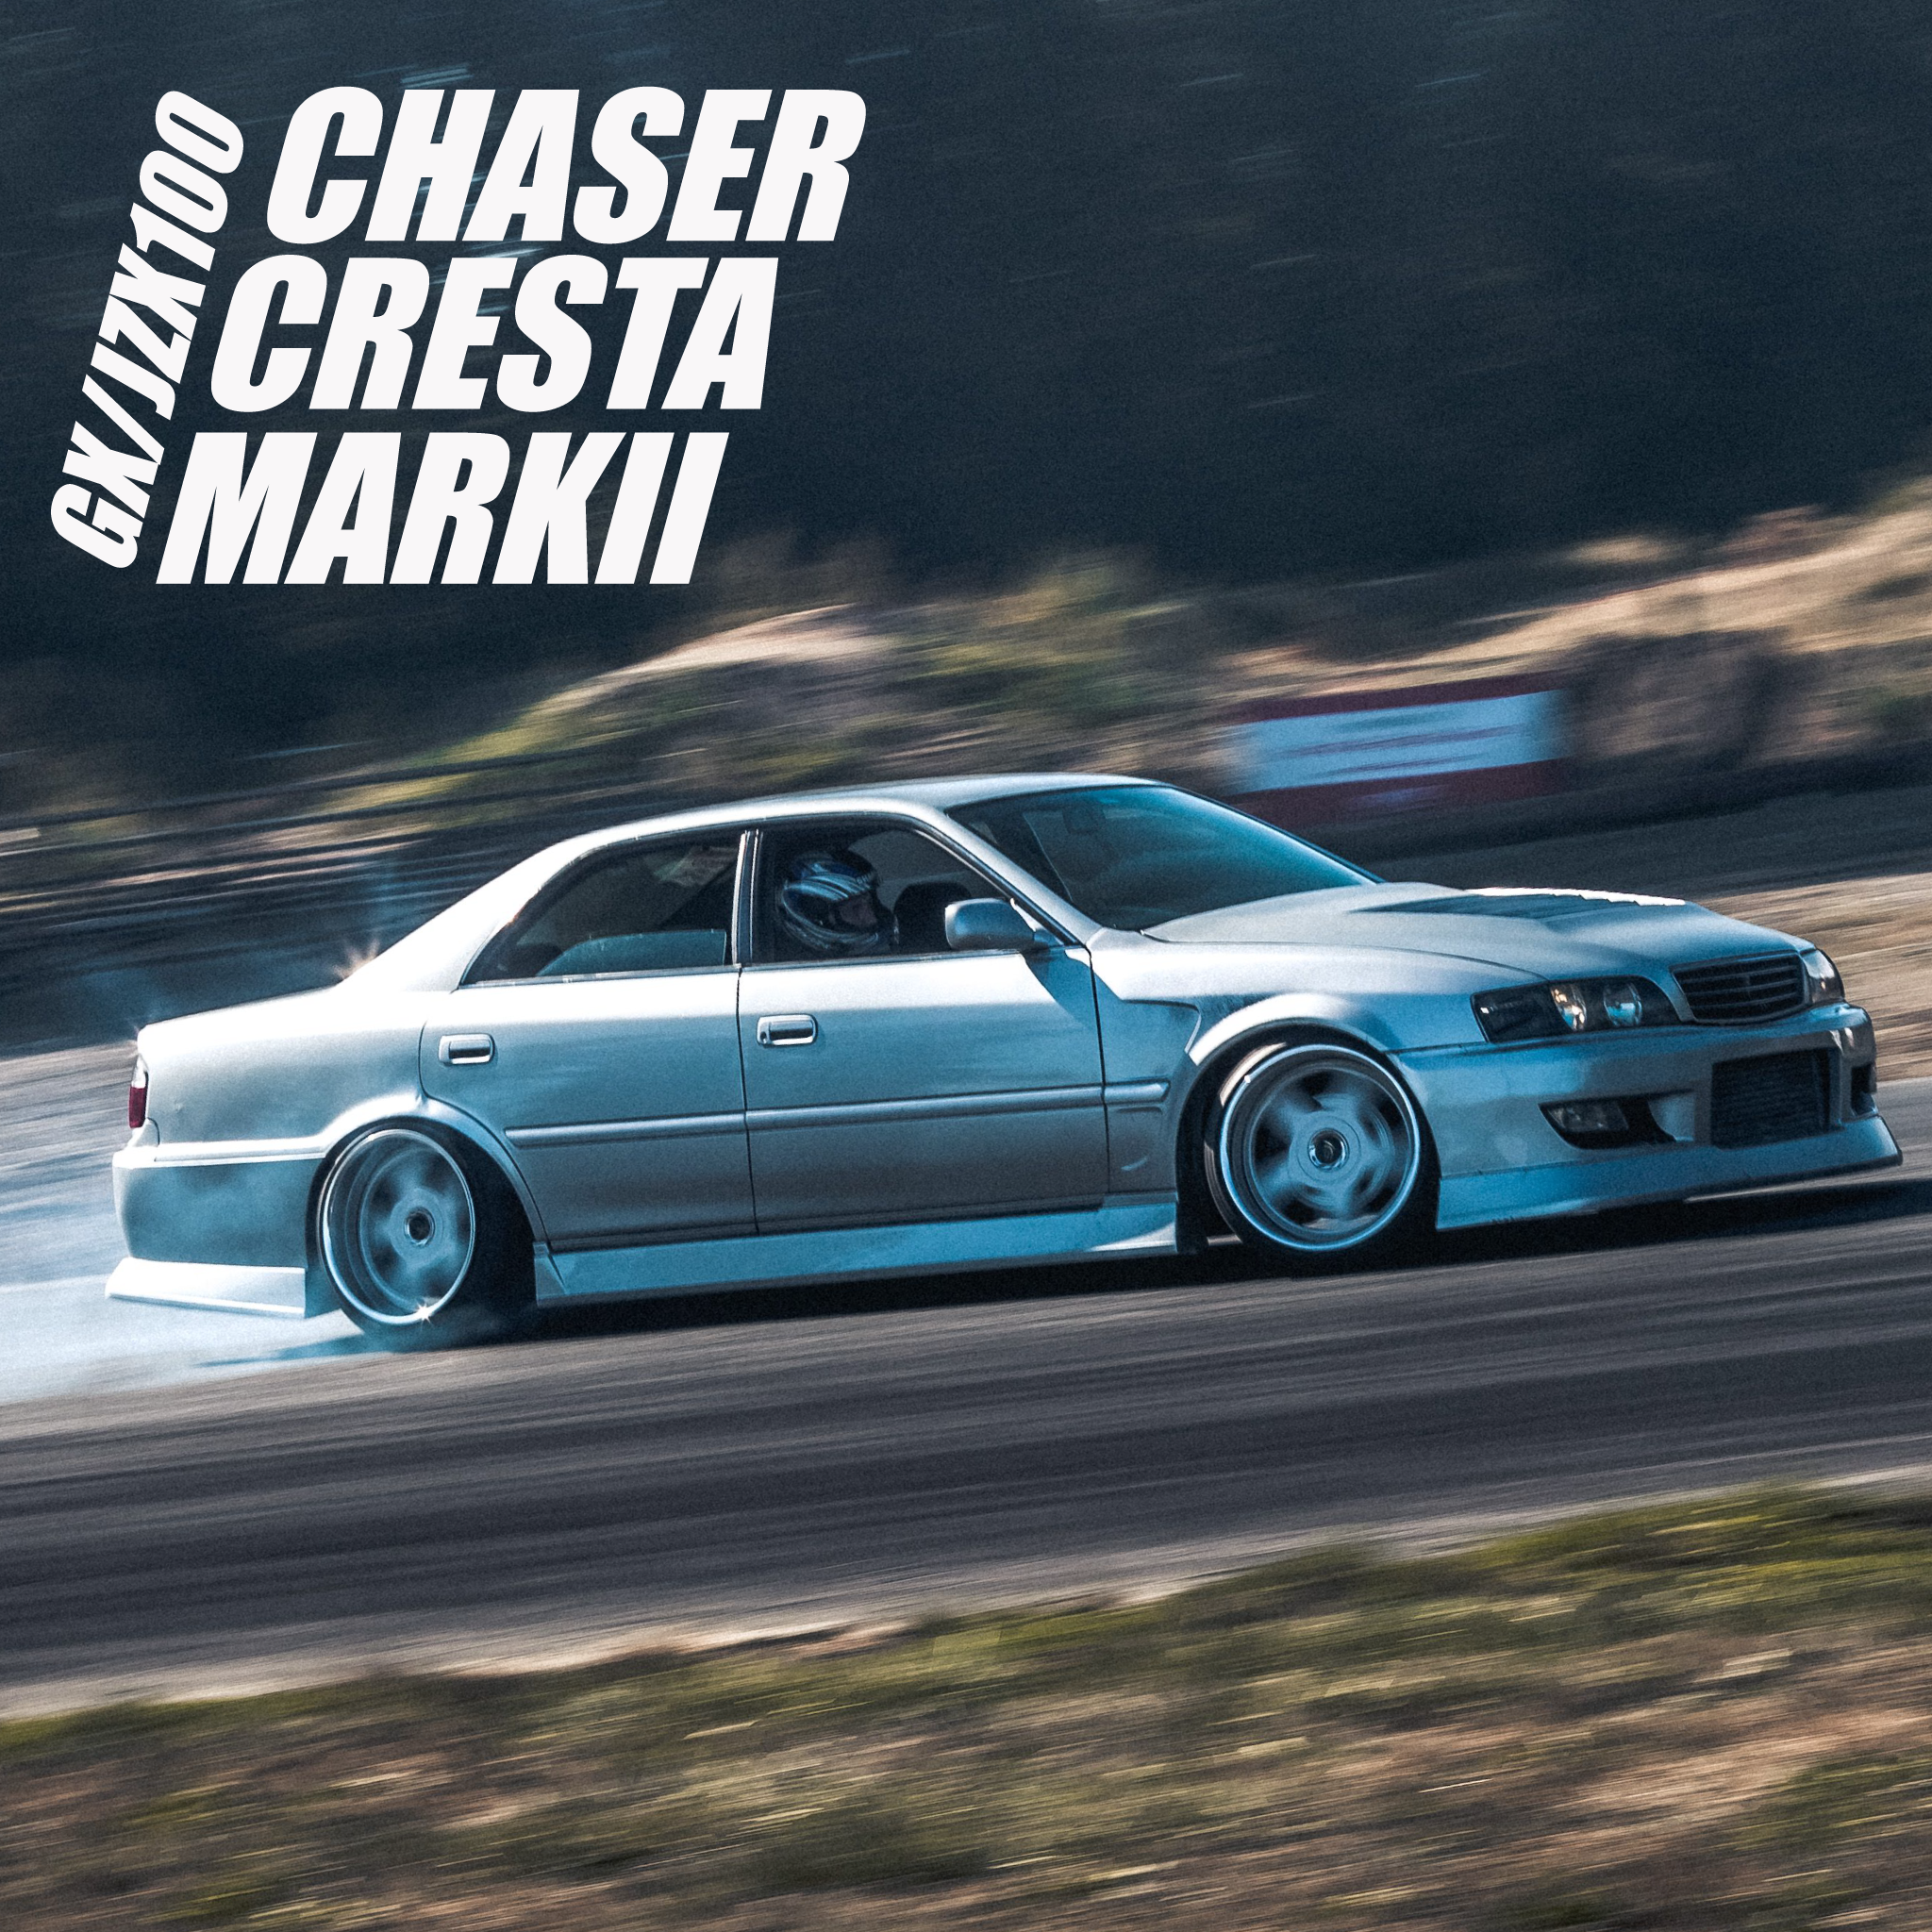 Silver Chaser drifting on a track with 'CHASER CRESTA MARKII' in bold text, showing performance and design